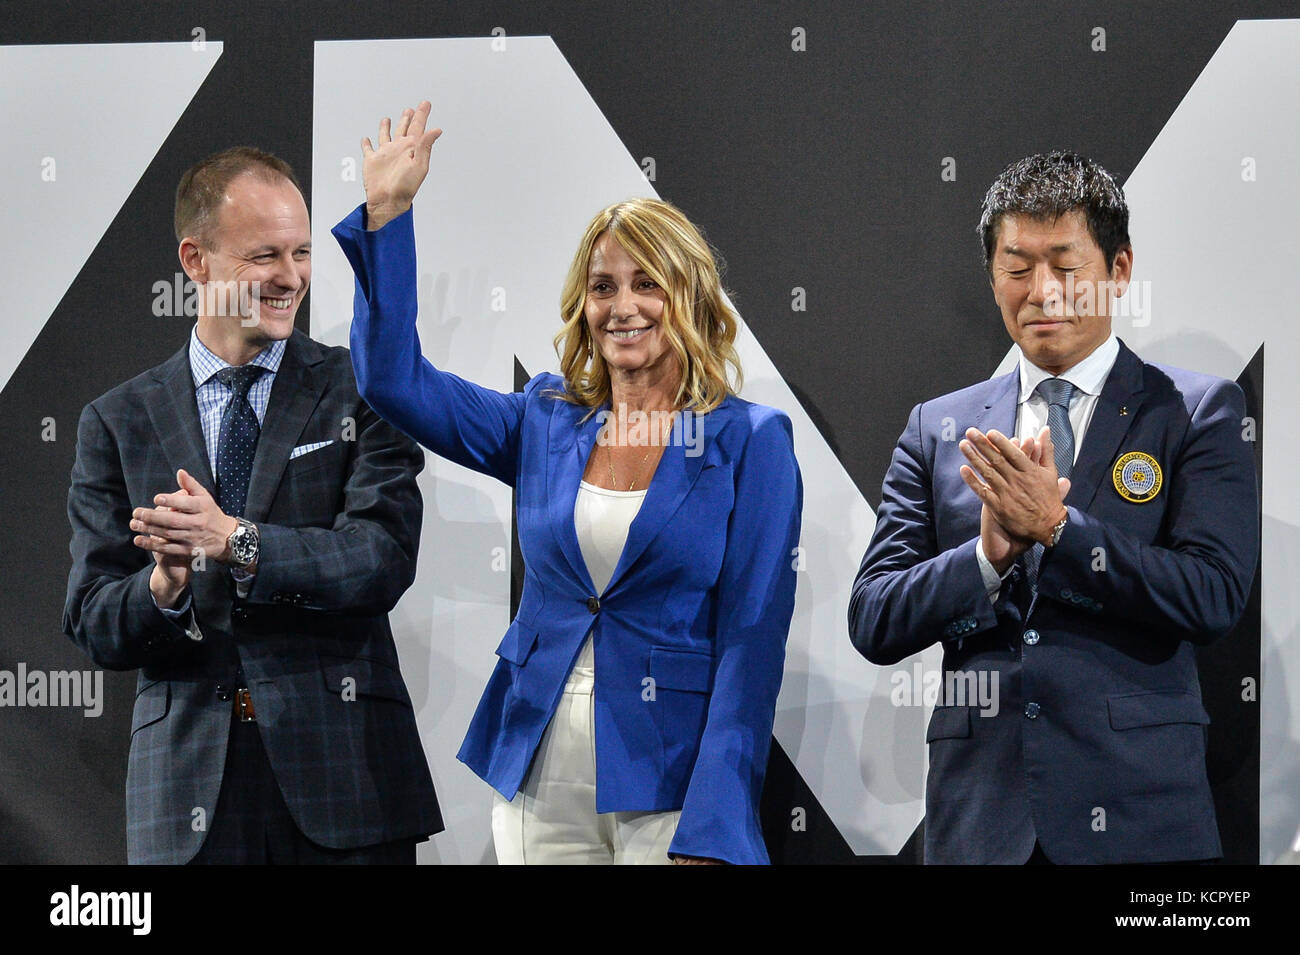 Montreal, Quebec, Canada. 6th Oct, 2017. NADIA COMANECI (center), is presented to the crowd during the Women's All-Around Finals held at the Olympic Stadium in Montreal, Quebec. Credit: Amy Sanderson/ZUMA Wire/Alamy Live News Stock Photo